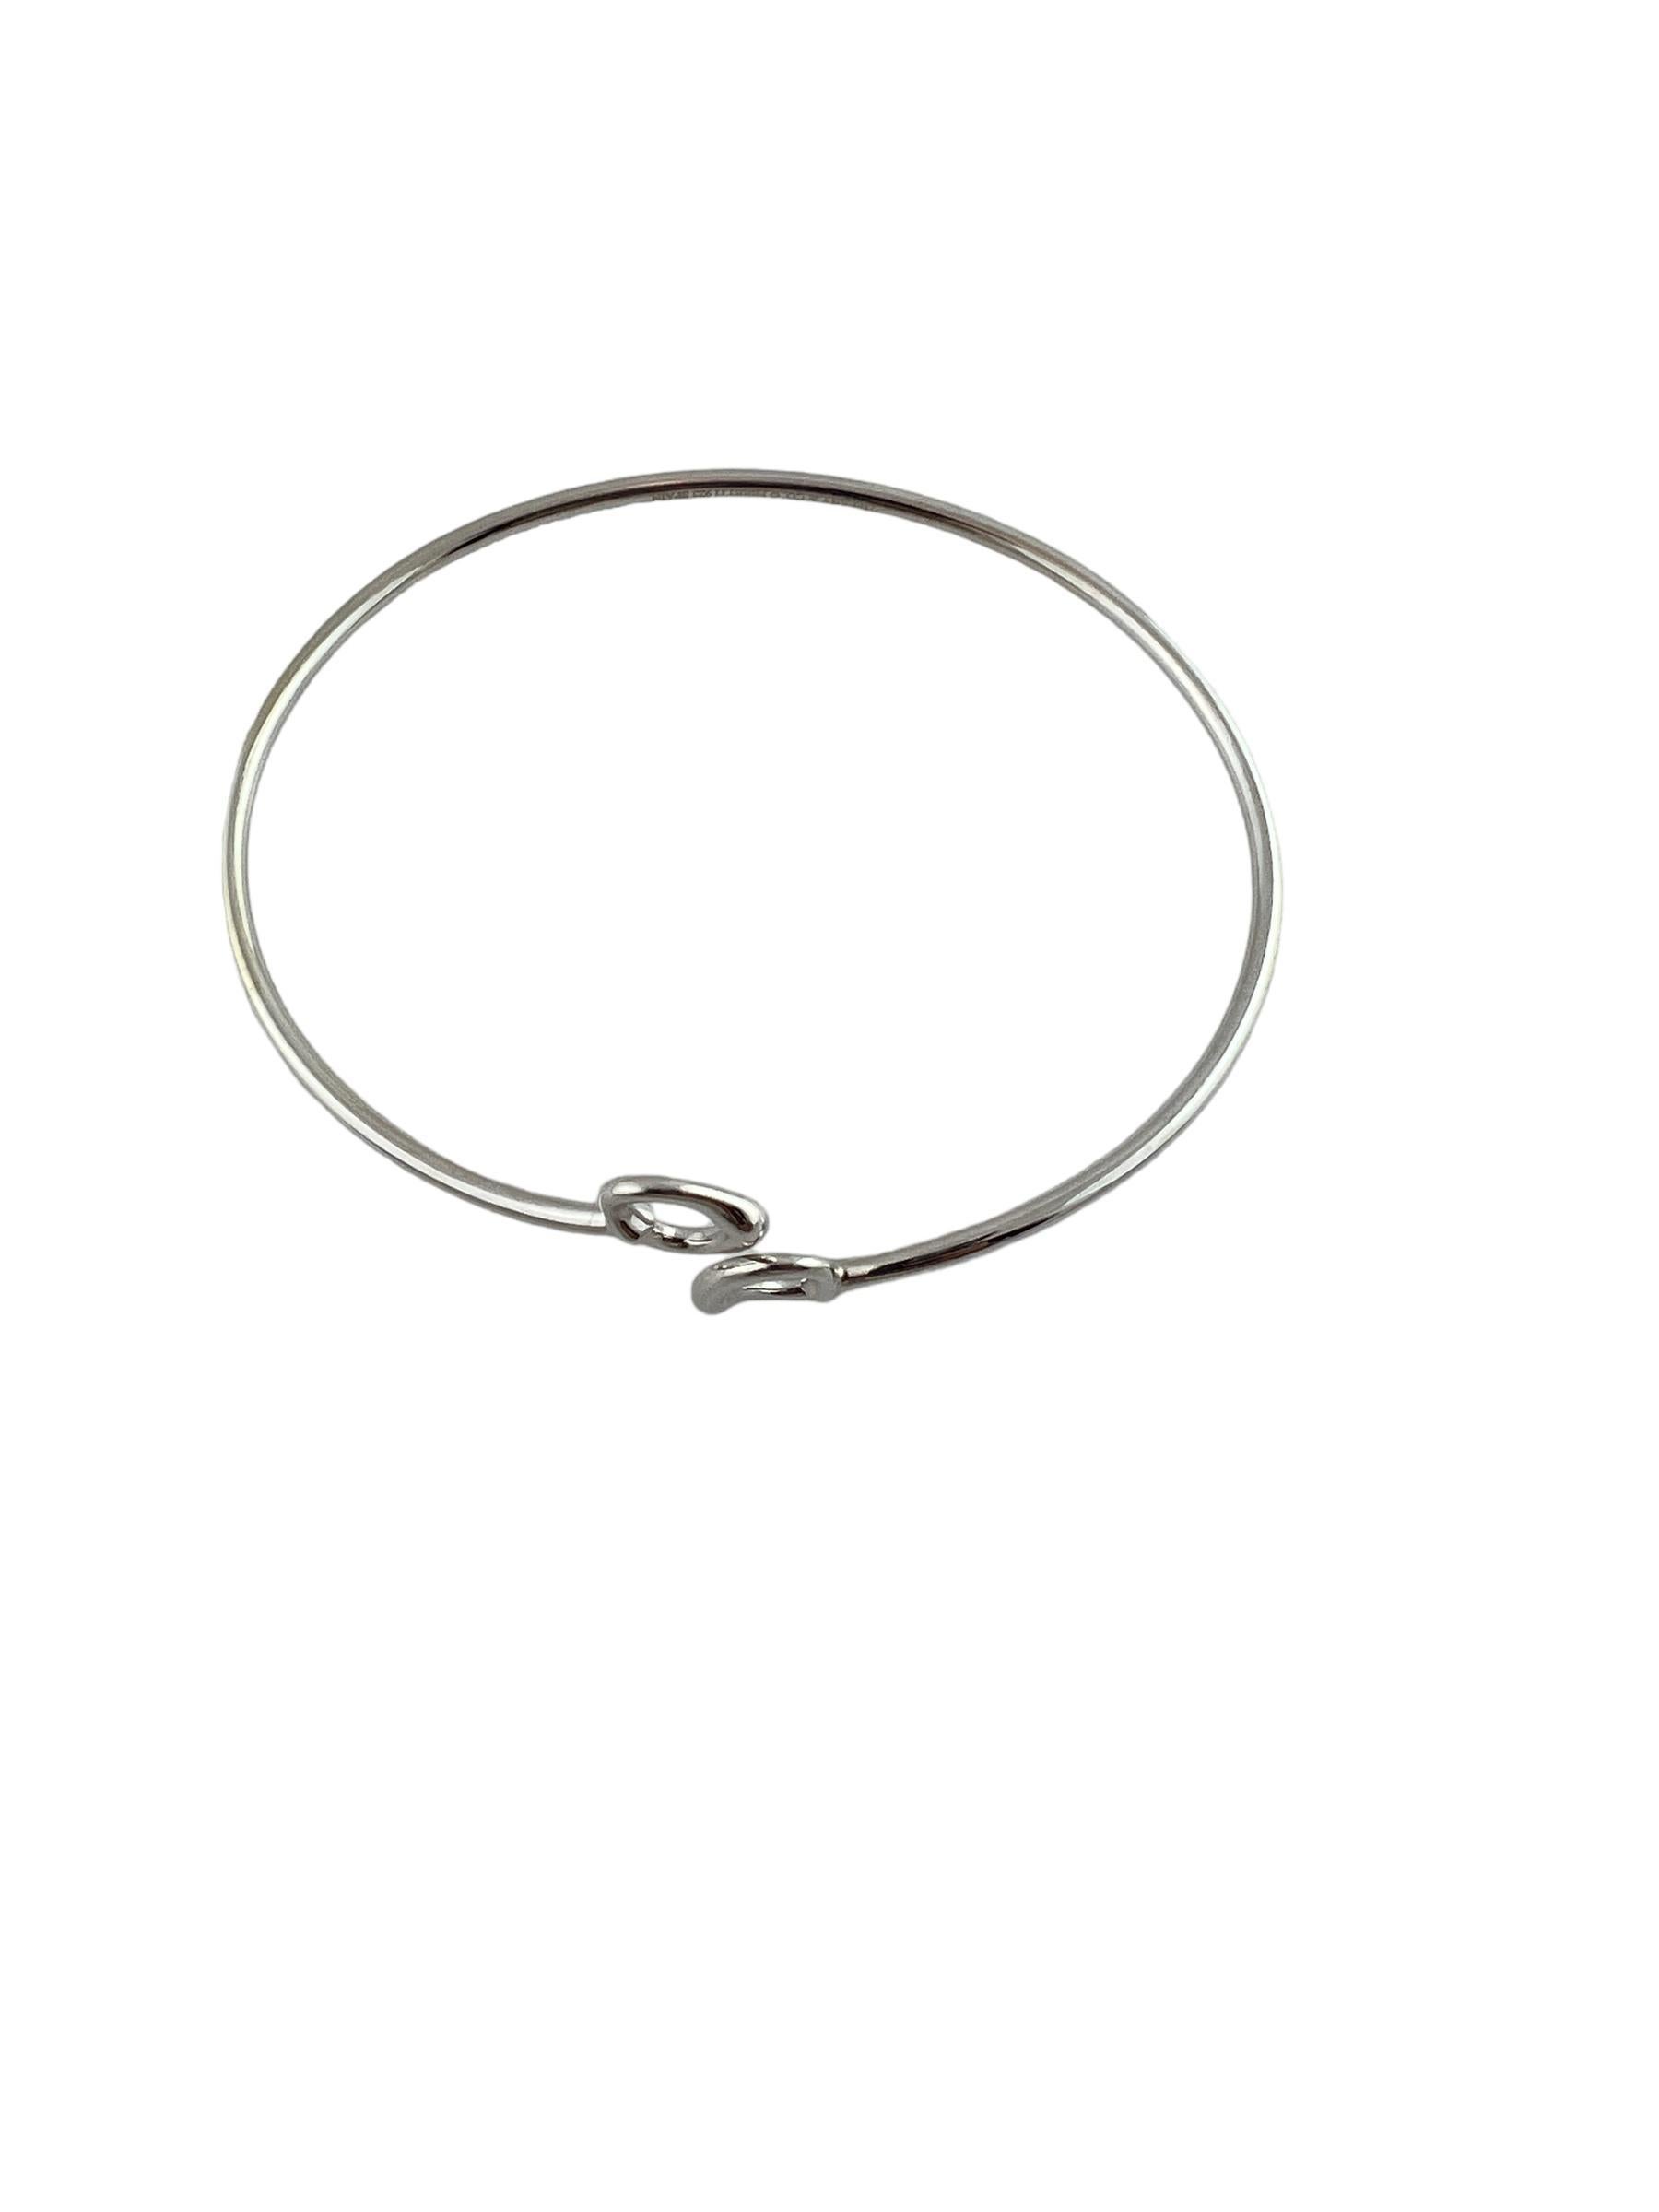 Tiffany & Co. Elsa Peretti Sterling Silver Double Open Heart Bangle Bracelet #15447

This sterling silver double open heart bangle bracelet was designed by Elsa Peretti for Tiffany & Co.

Fits up to 7